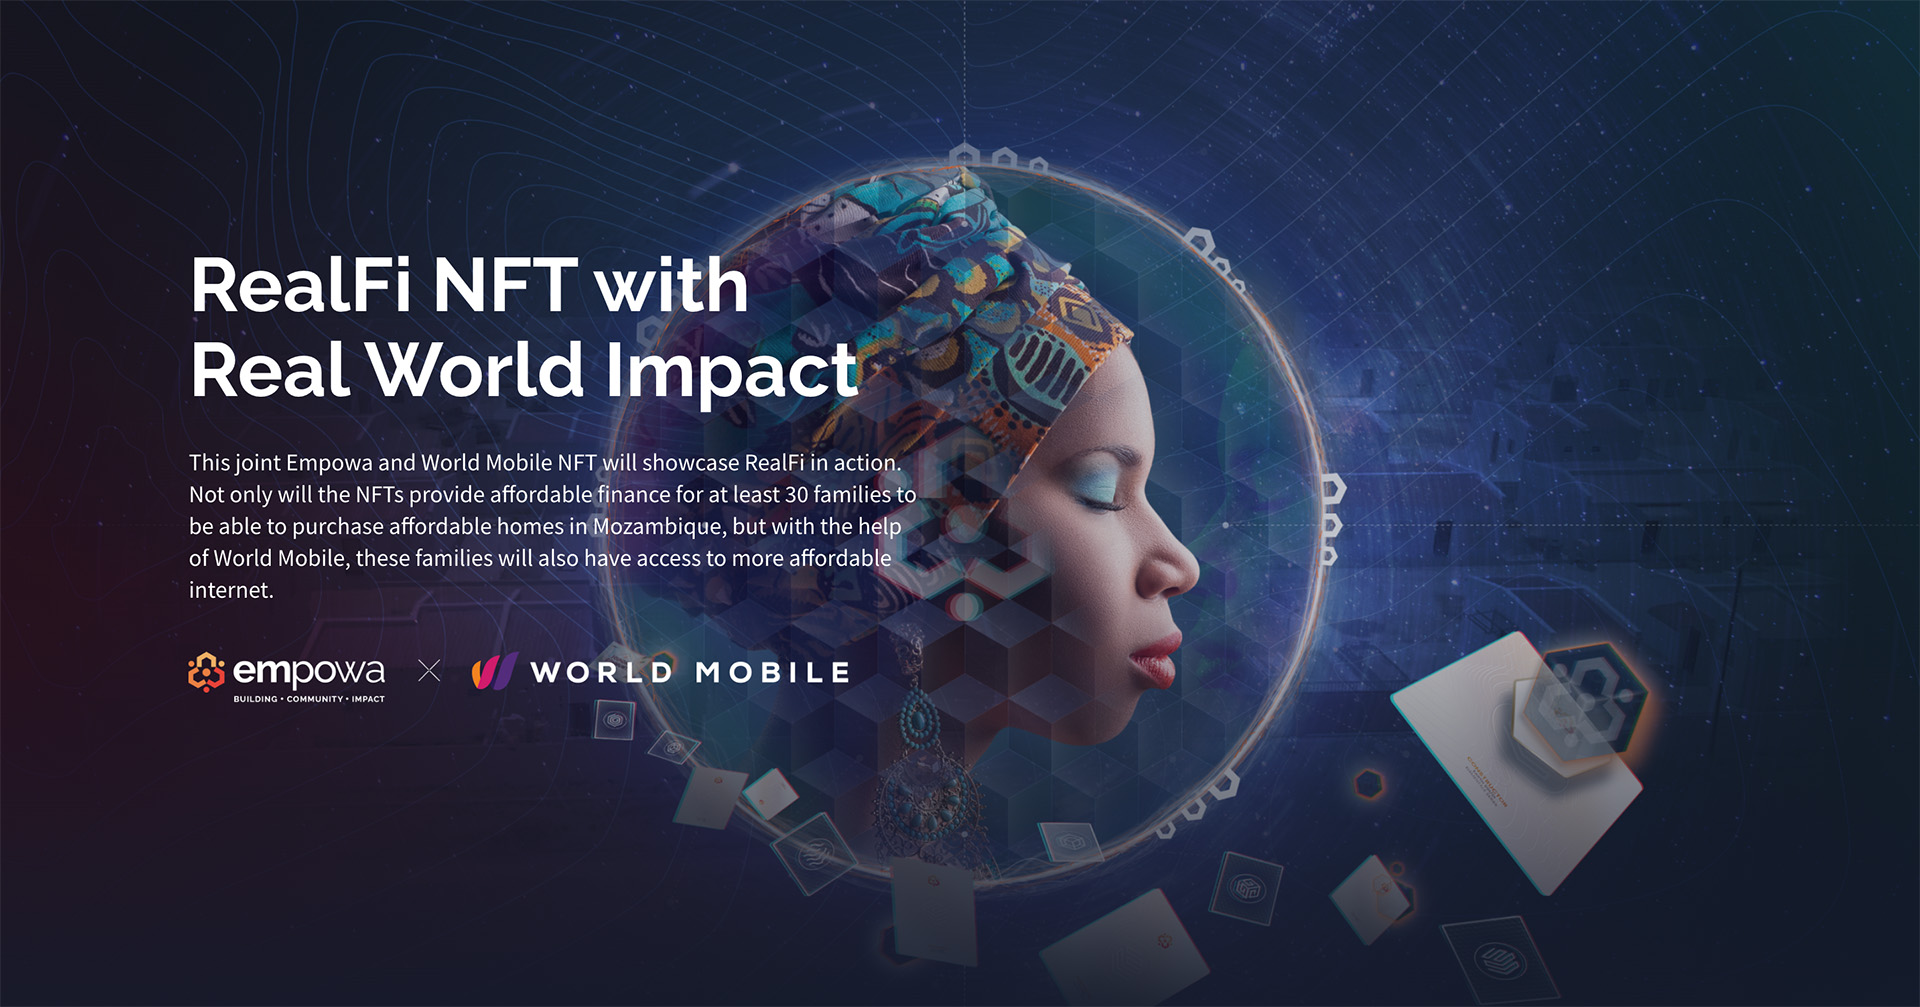 The RealFi NFT that makes Real World Impact on Housing and Connectivity. - Empowa